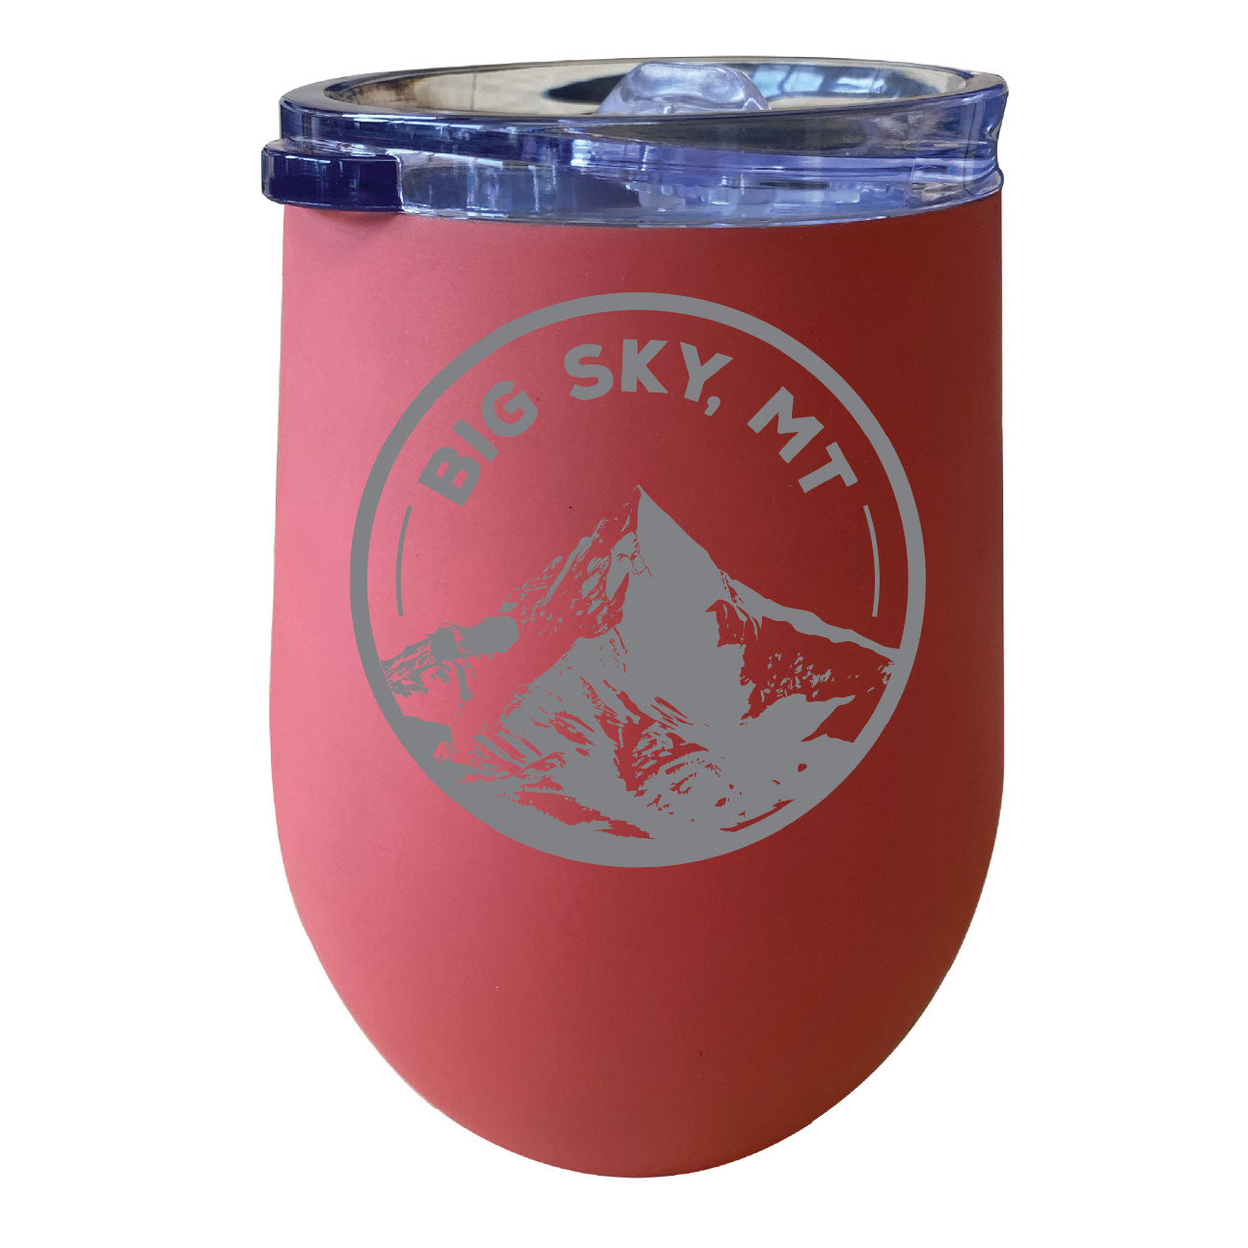 Big Sky Montana Souvenir 12 Oz Engraved Insulated Wine Stainless Steel Tumbler - Coral,,4-Pack